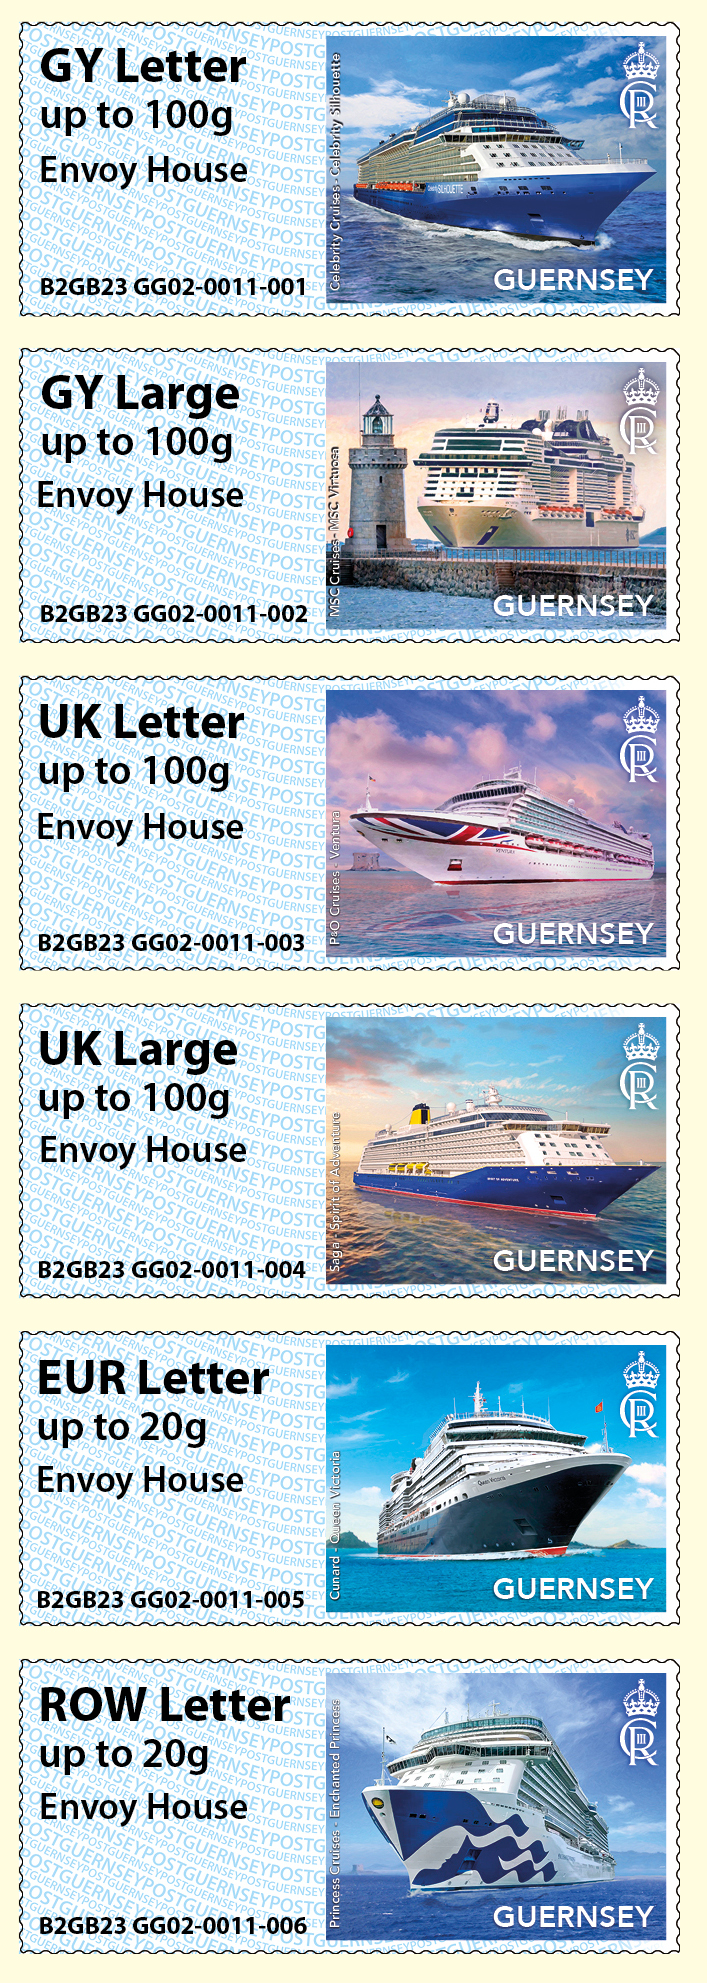 GG02 Series Visiting Cruise Ships Collectors strips, Envoy House